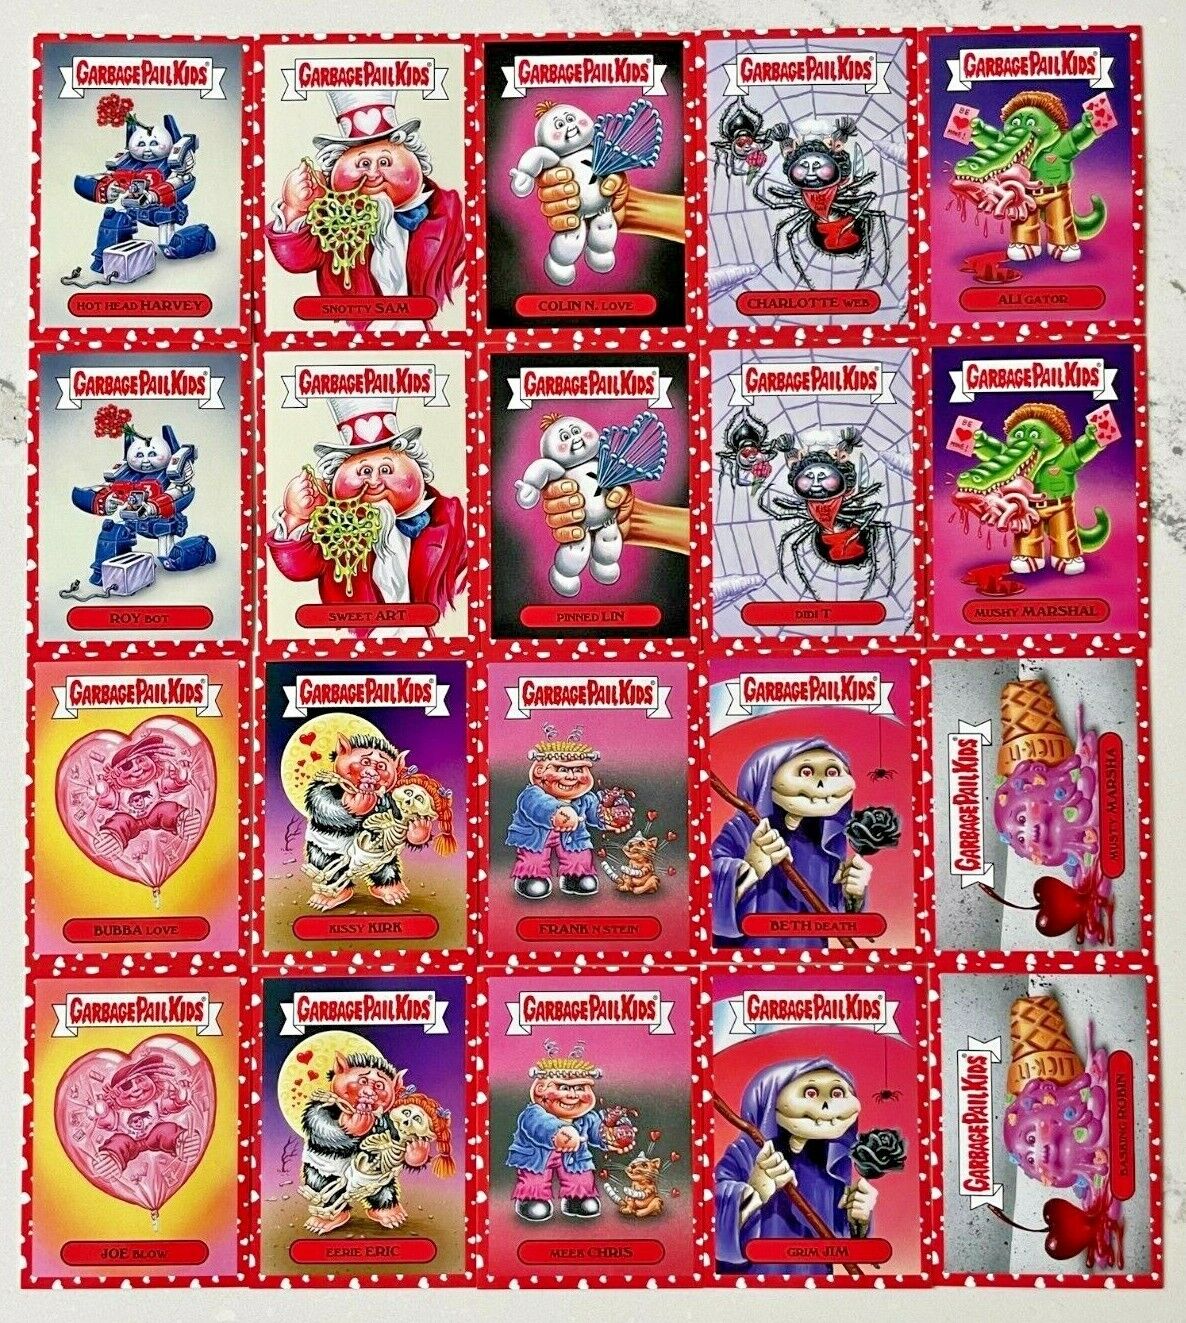 2022 Topps Garbage Pail Kids DISGUSTING DATING 20-Card RED HEART PARALLEL SET